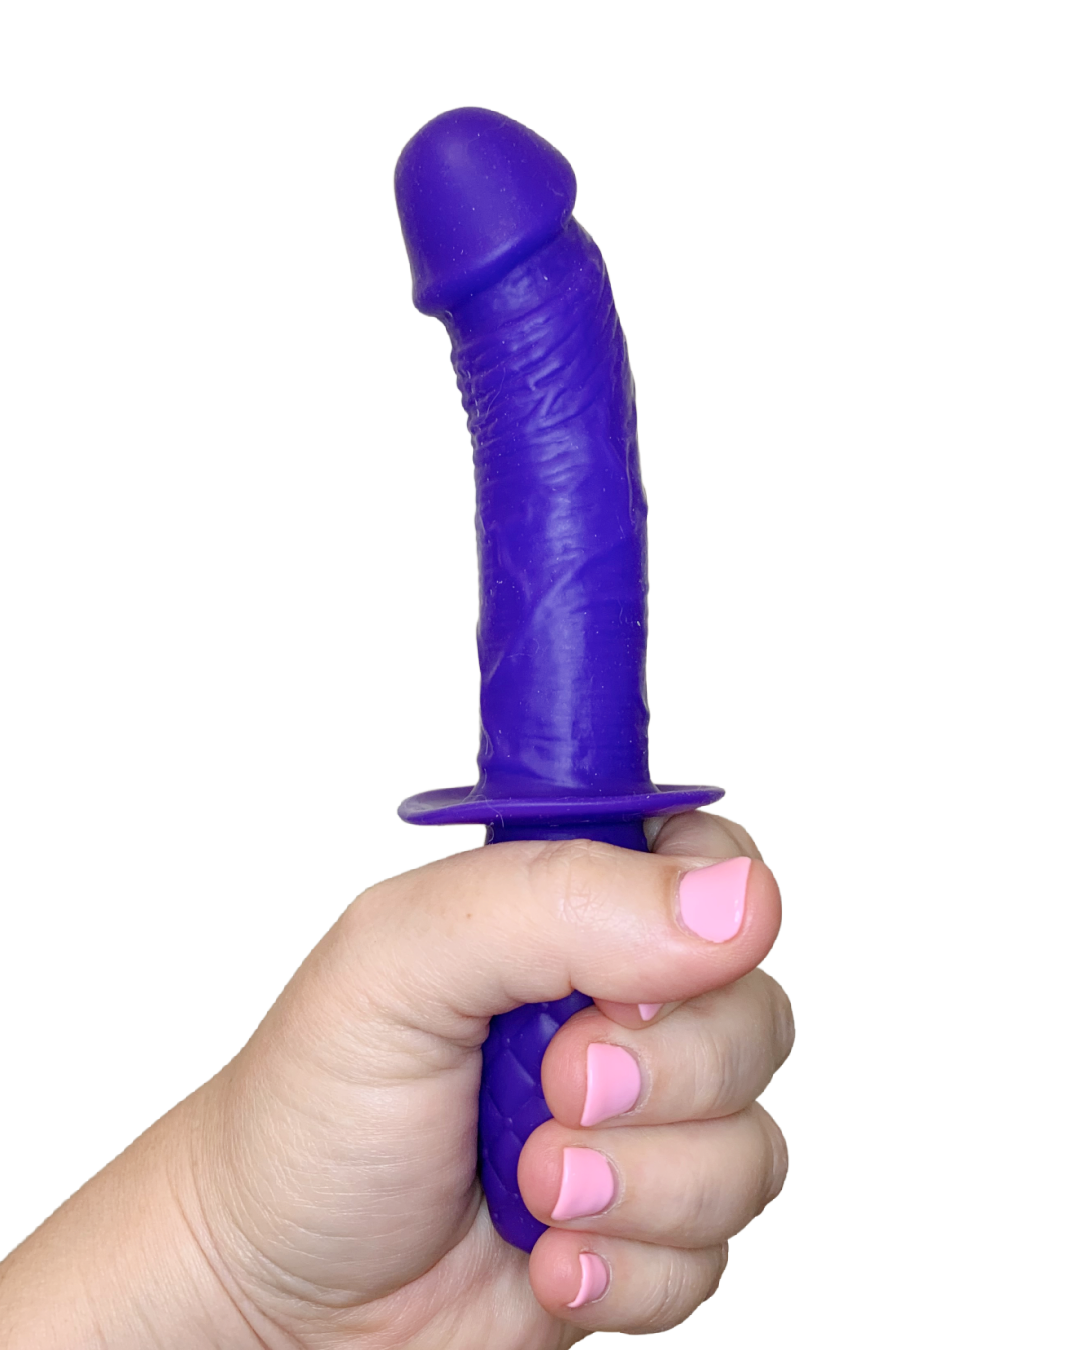 Silicone Grip Thruster 7.5 Inch G-Spot Dildo - Purple held in a hand